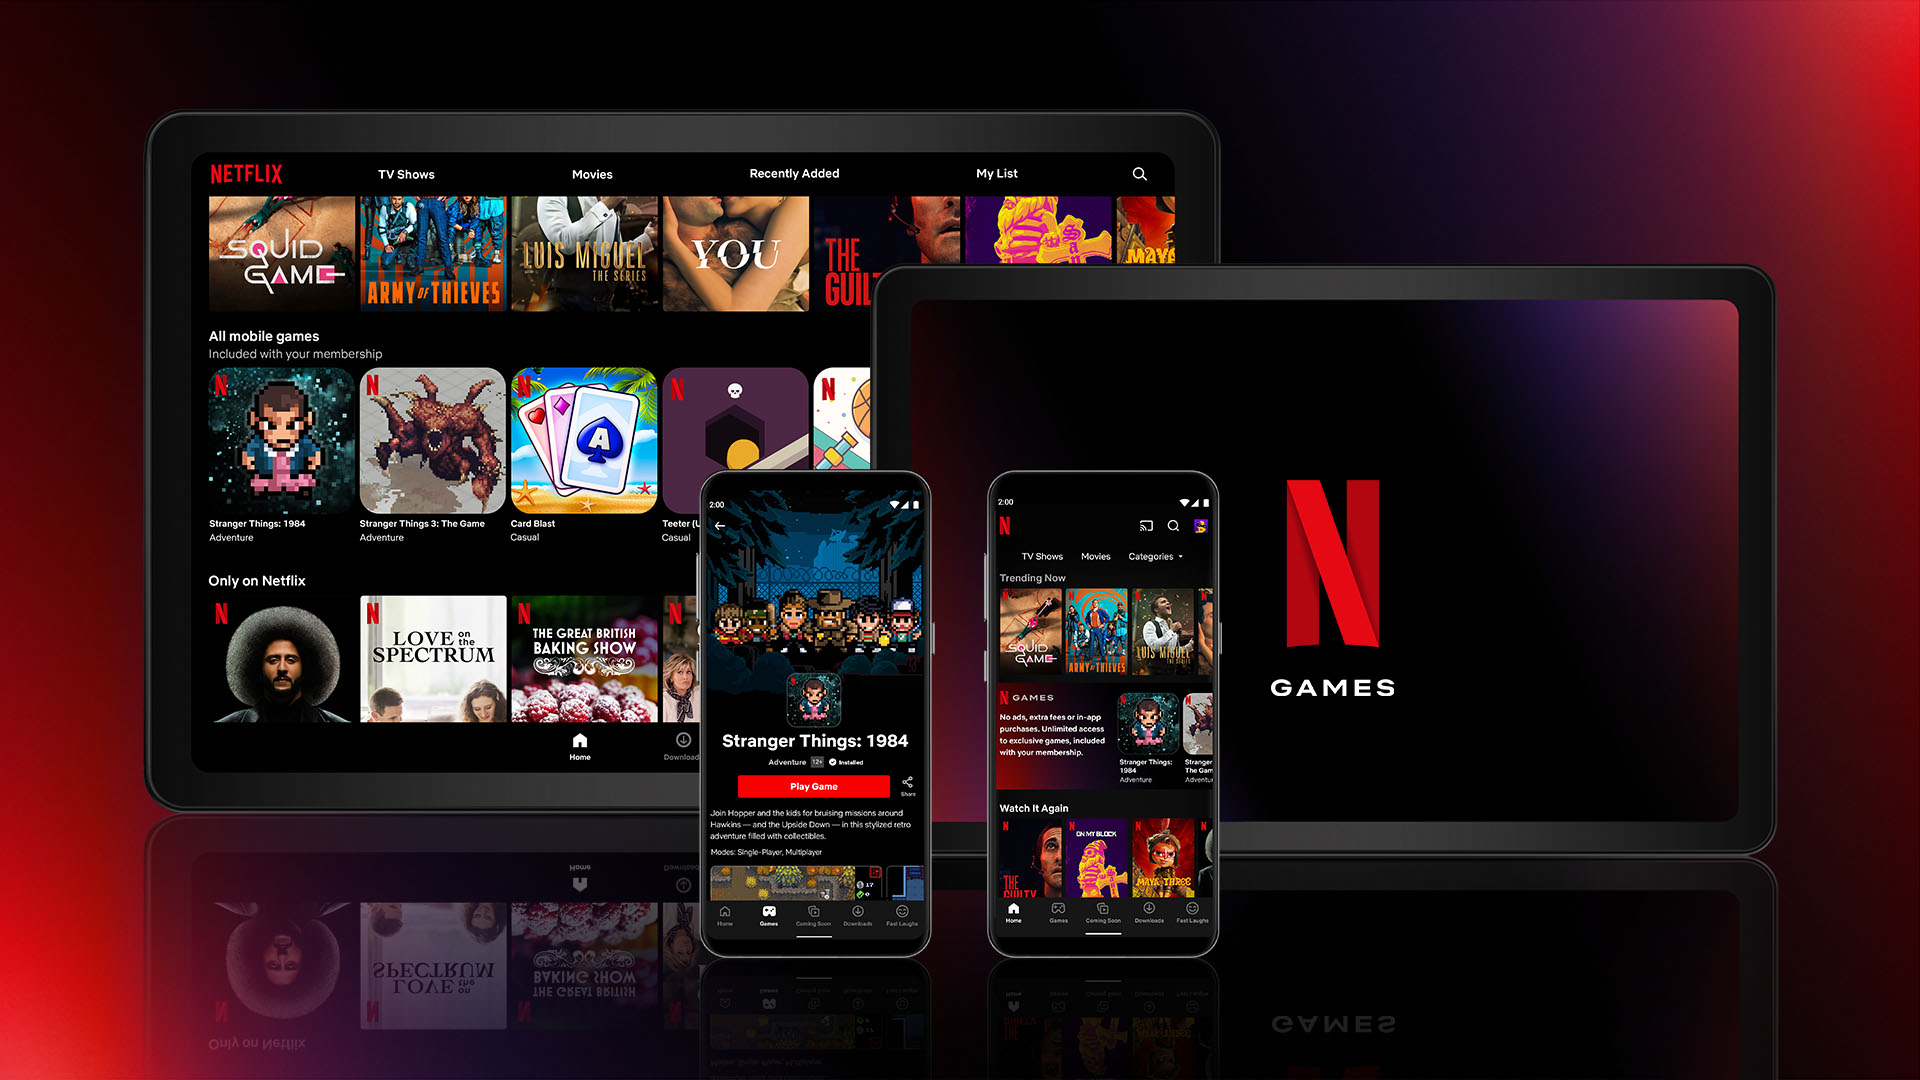 How to find and set up Netflix Video games